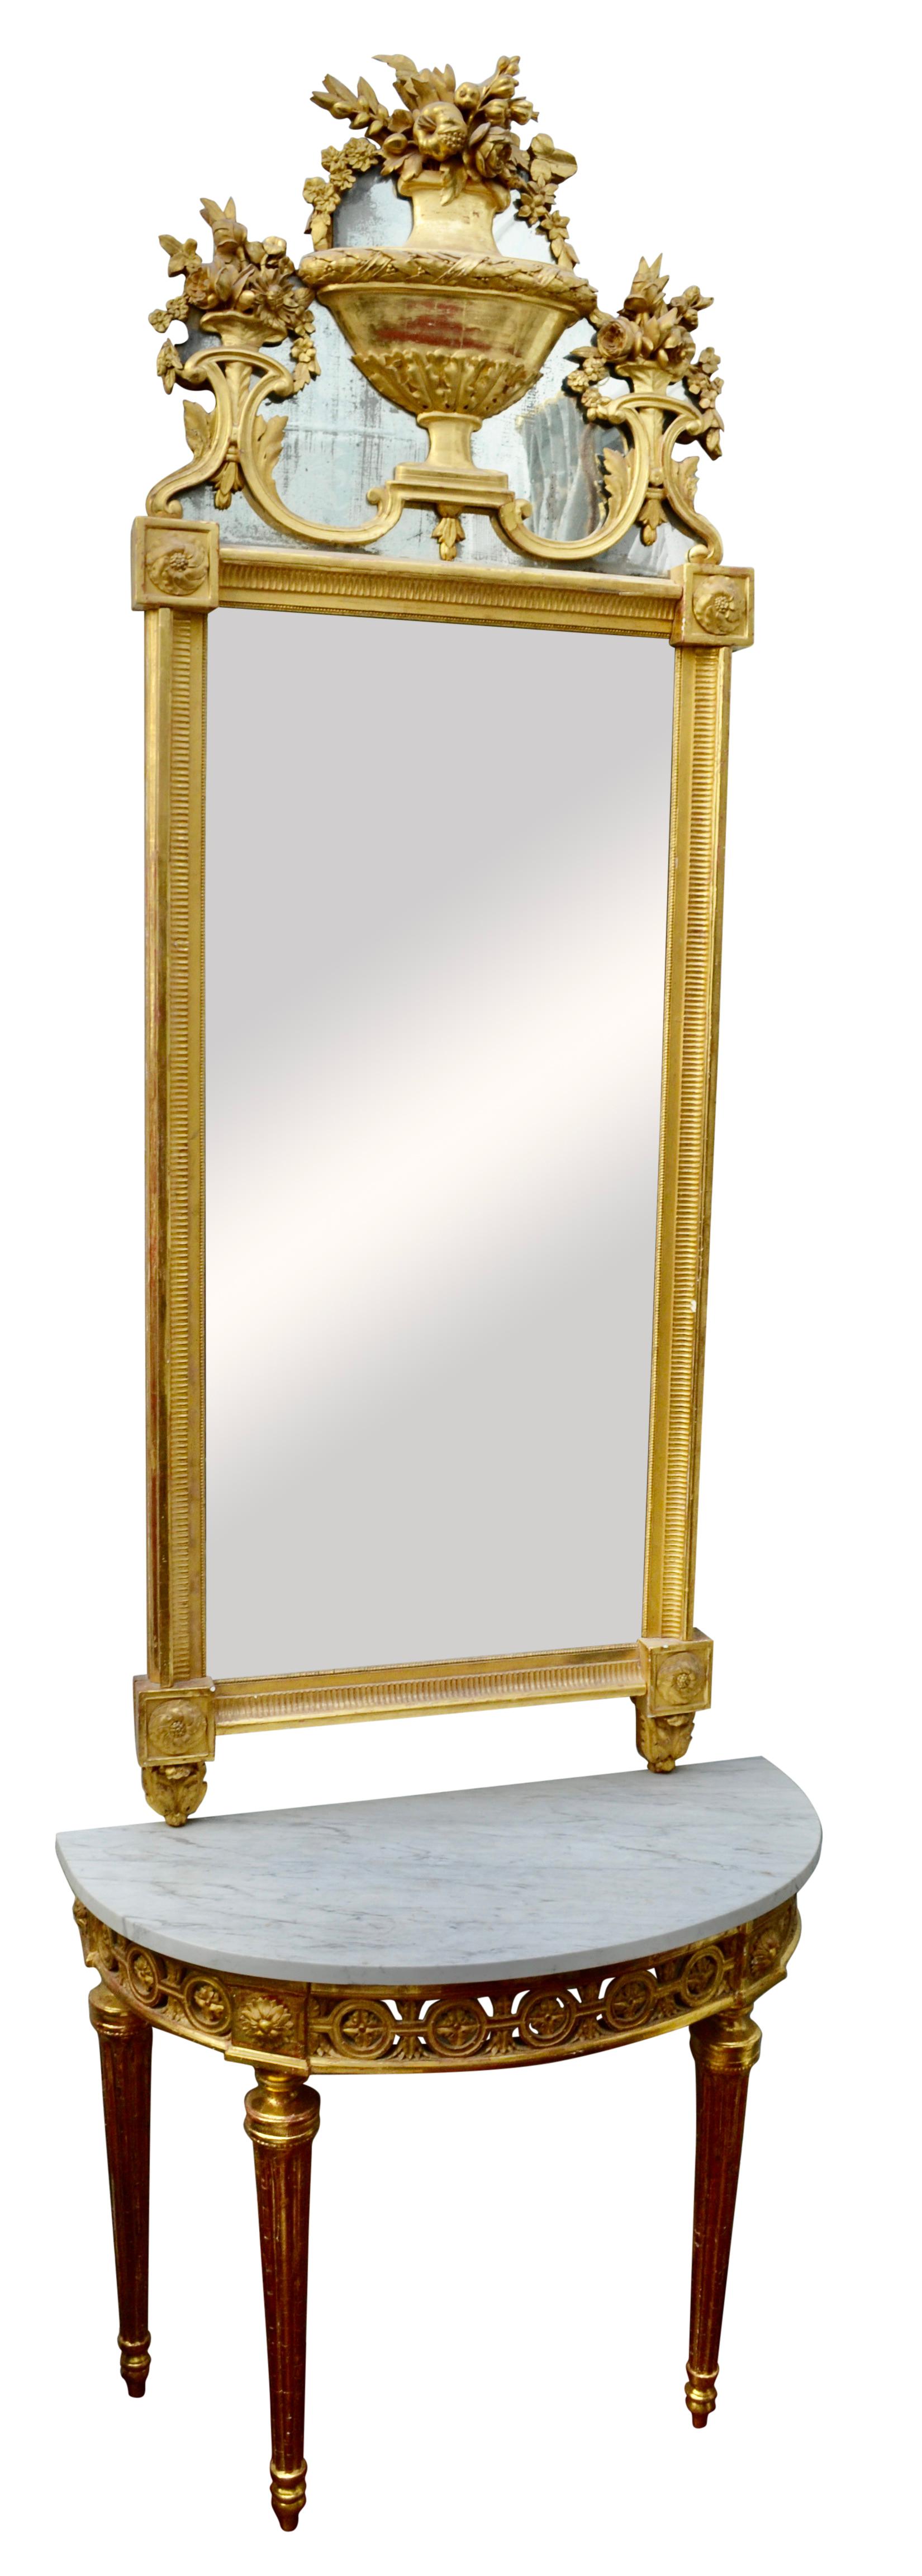 Late 18th Century Italian Giltwood Mirror and Demilune Console For Sale 1